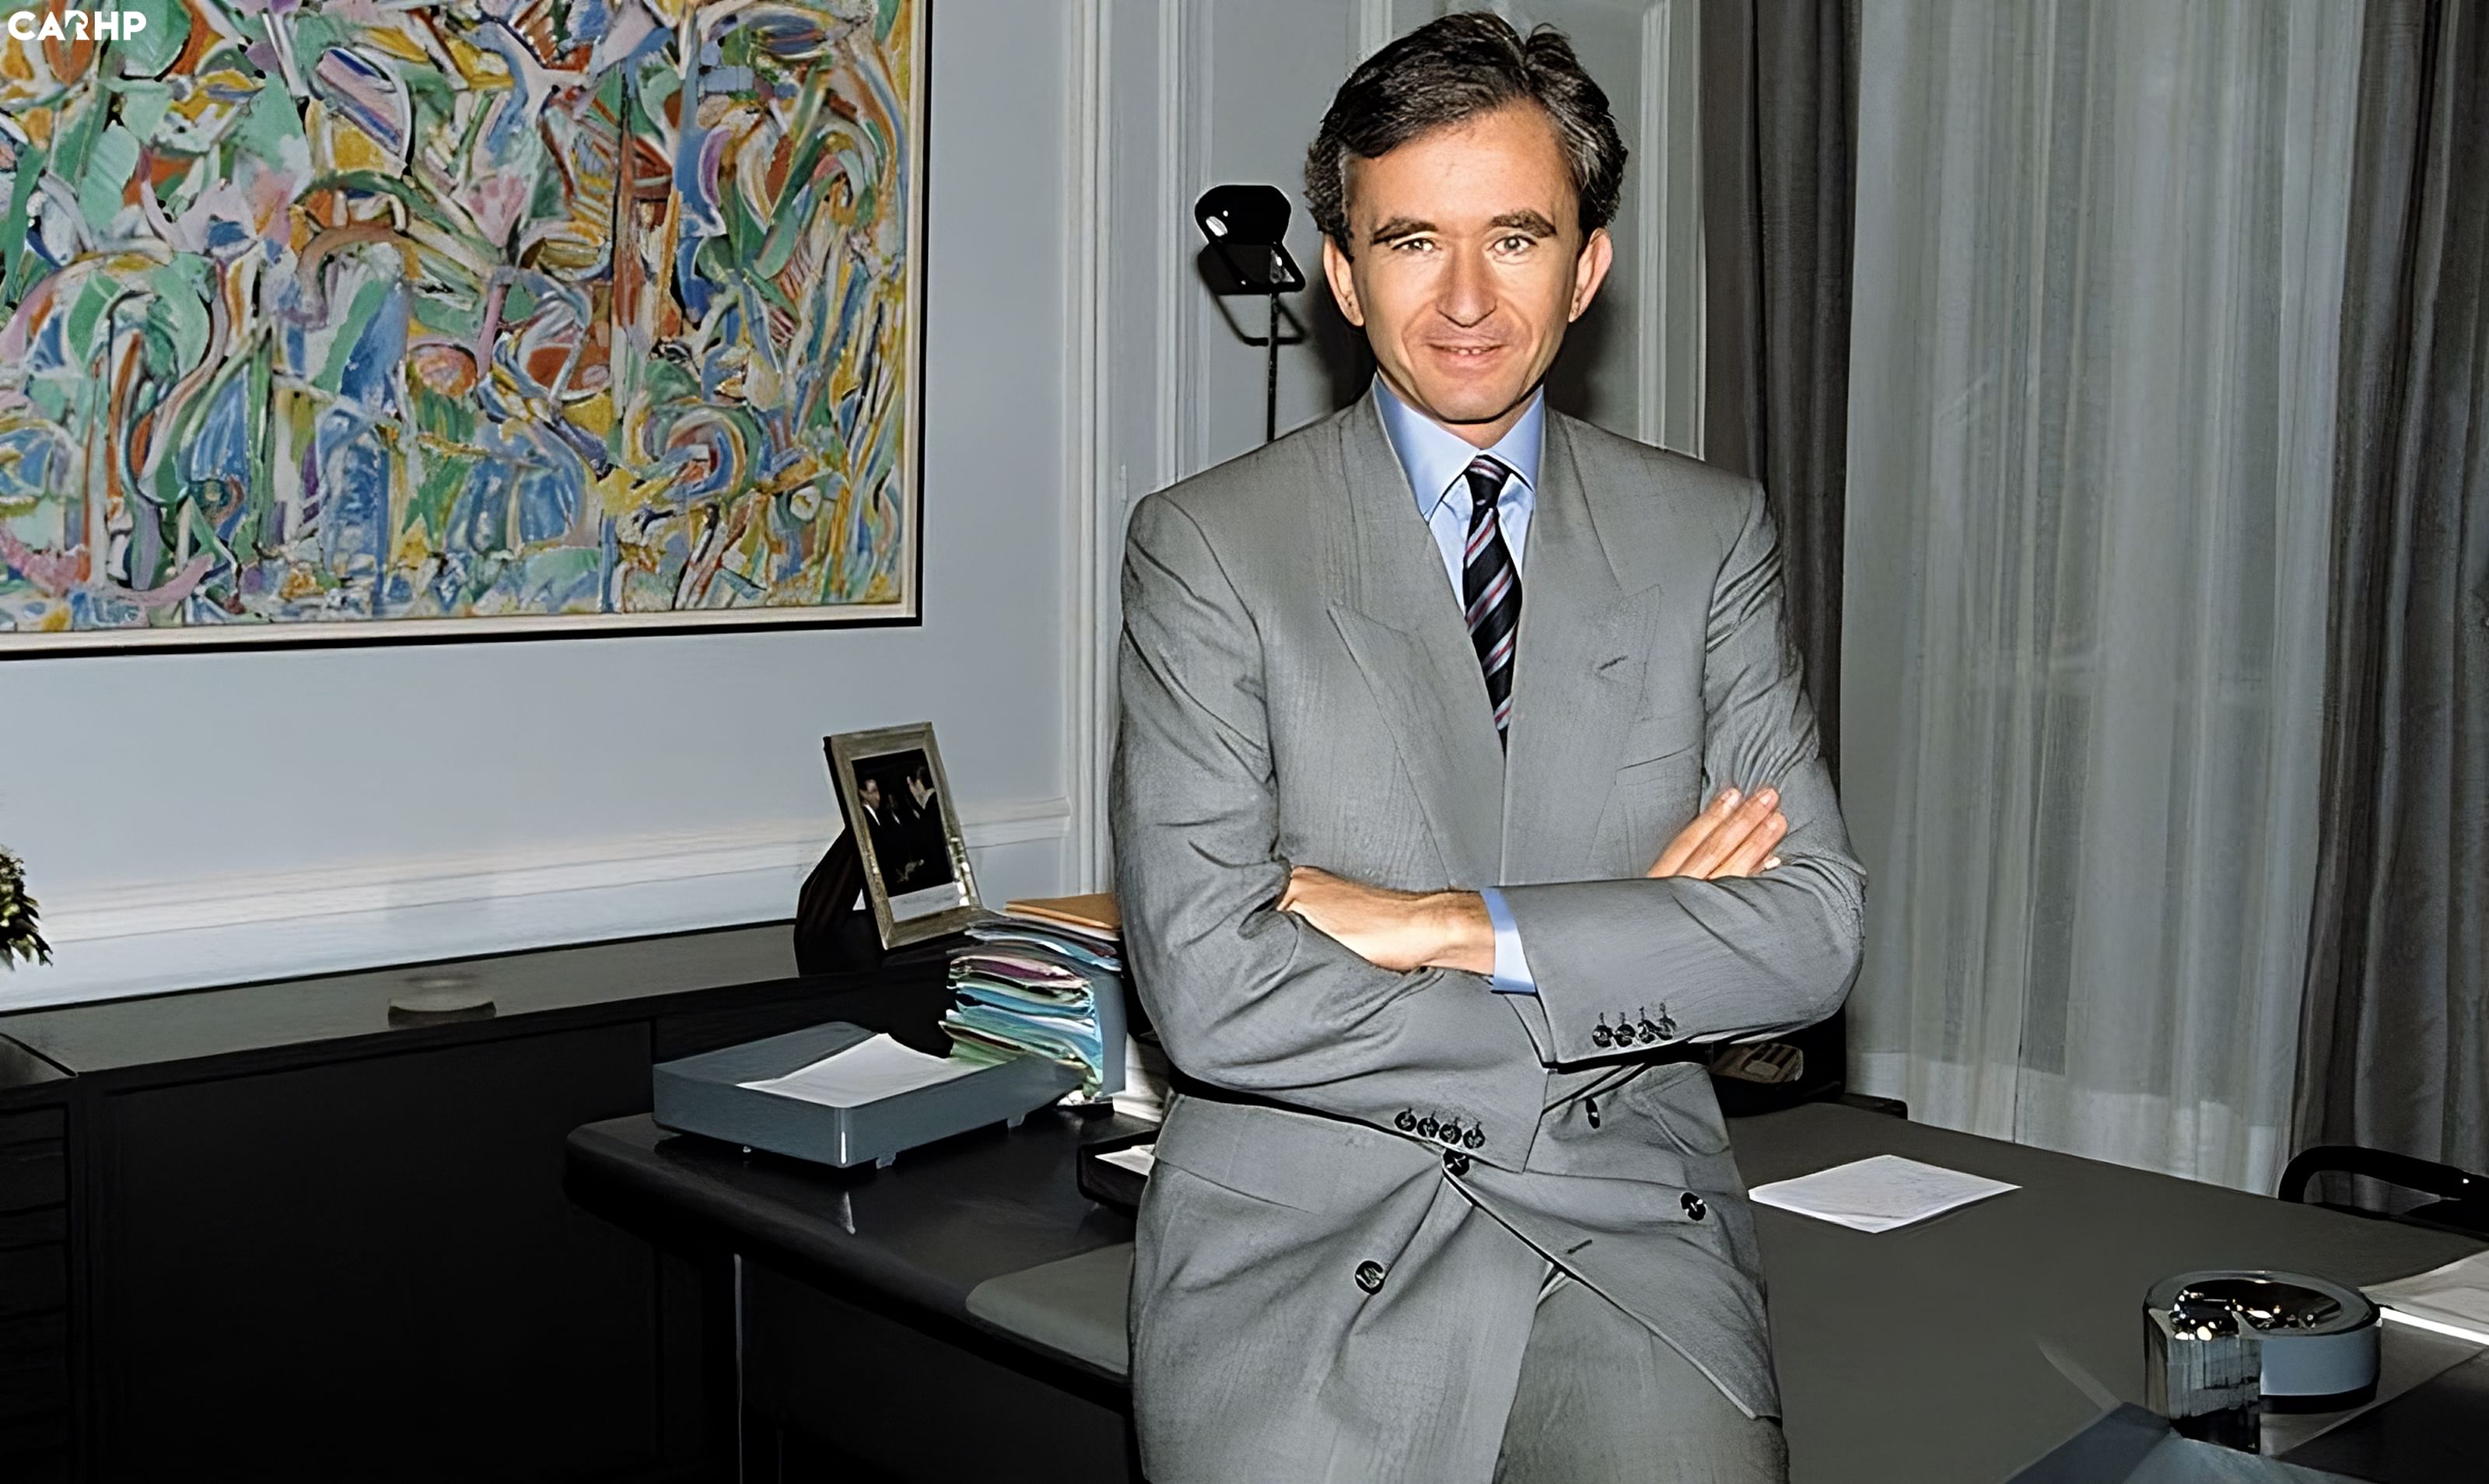 Jean Arnault Has New Goals for Louis Vuitton Watches. Profit Isn't One of  Them.